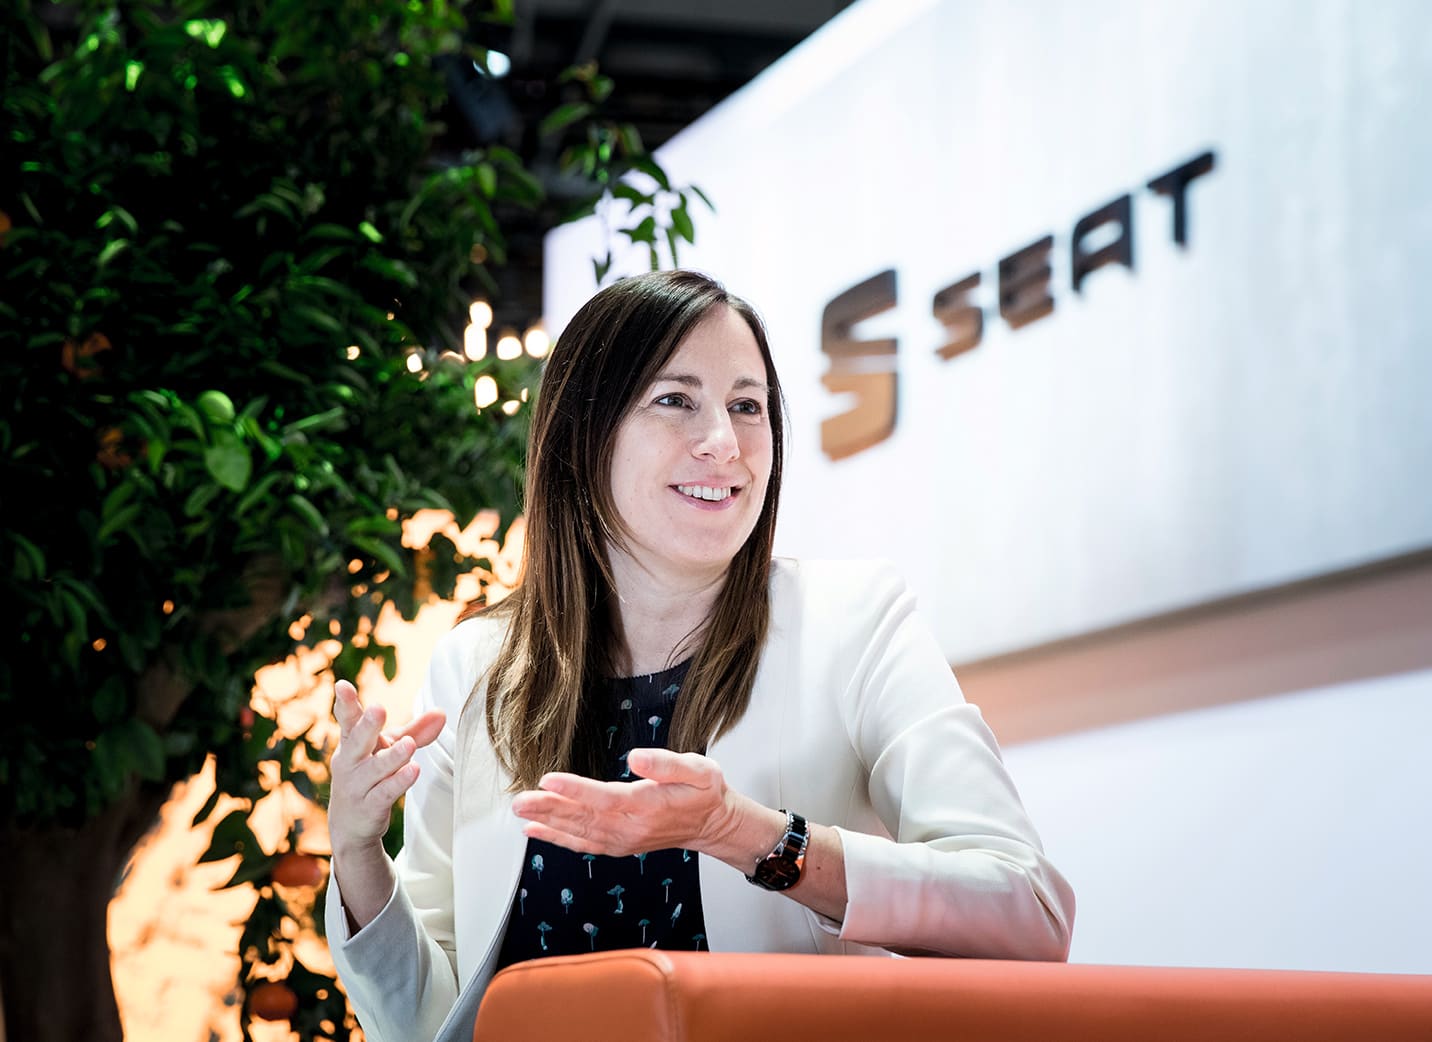 SEAT Manager of Infotainment and Connected Car Leyre Olavarria speaking